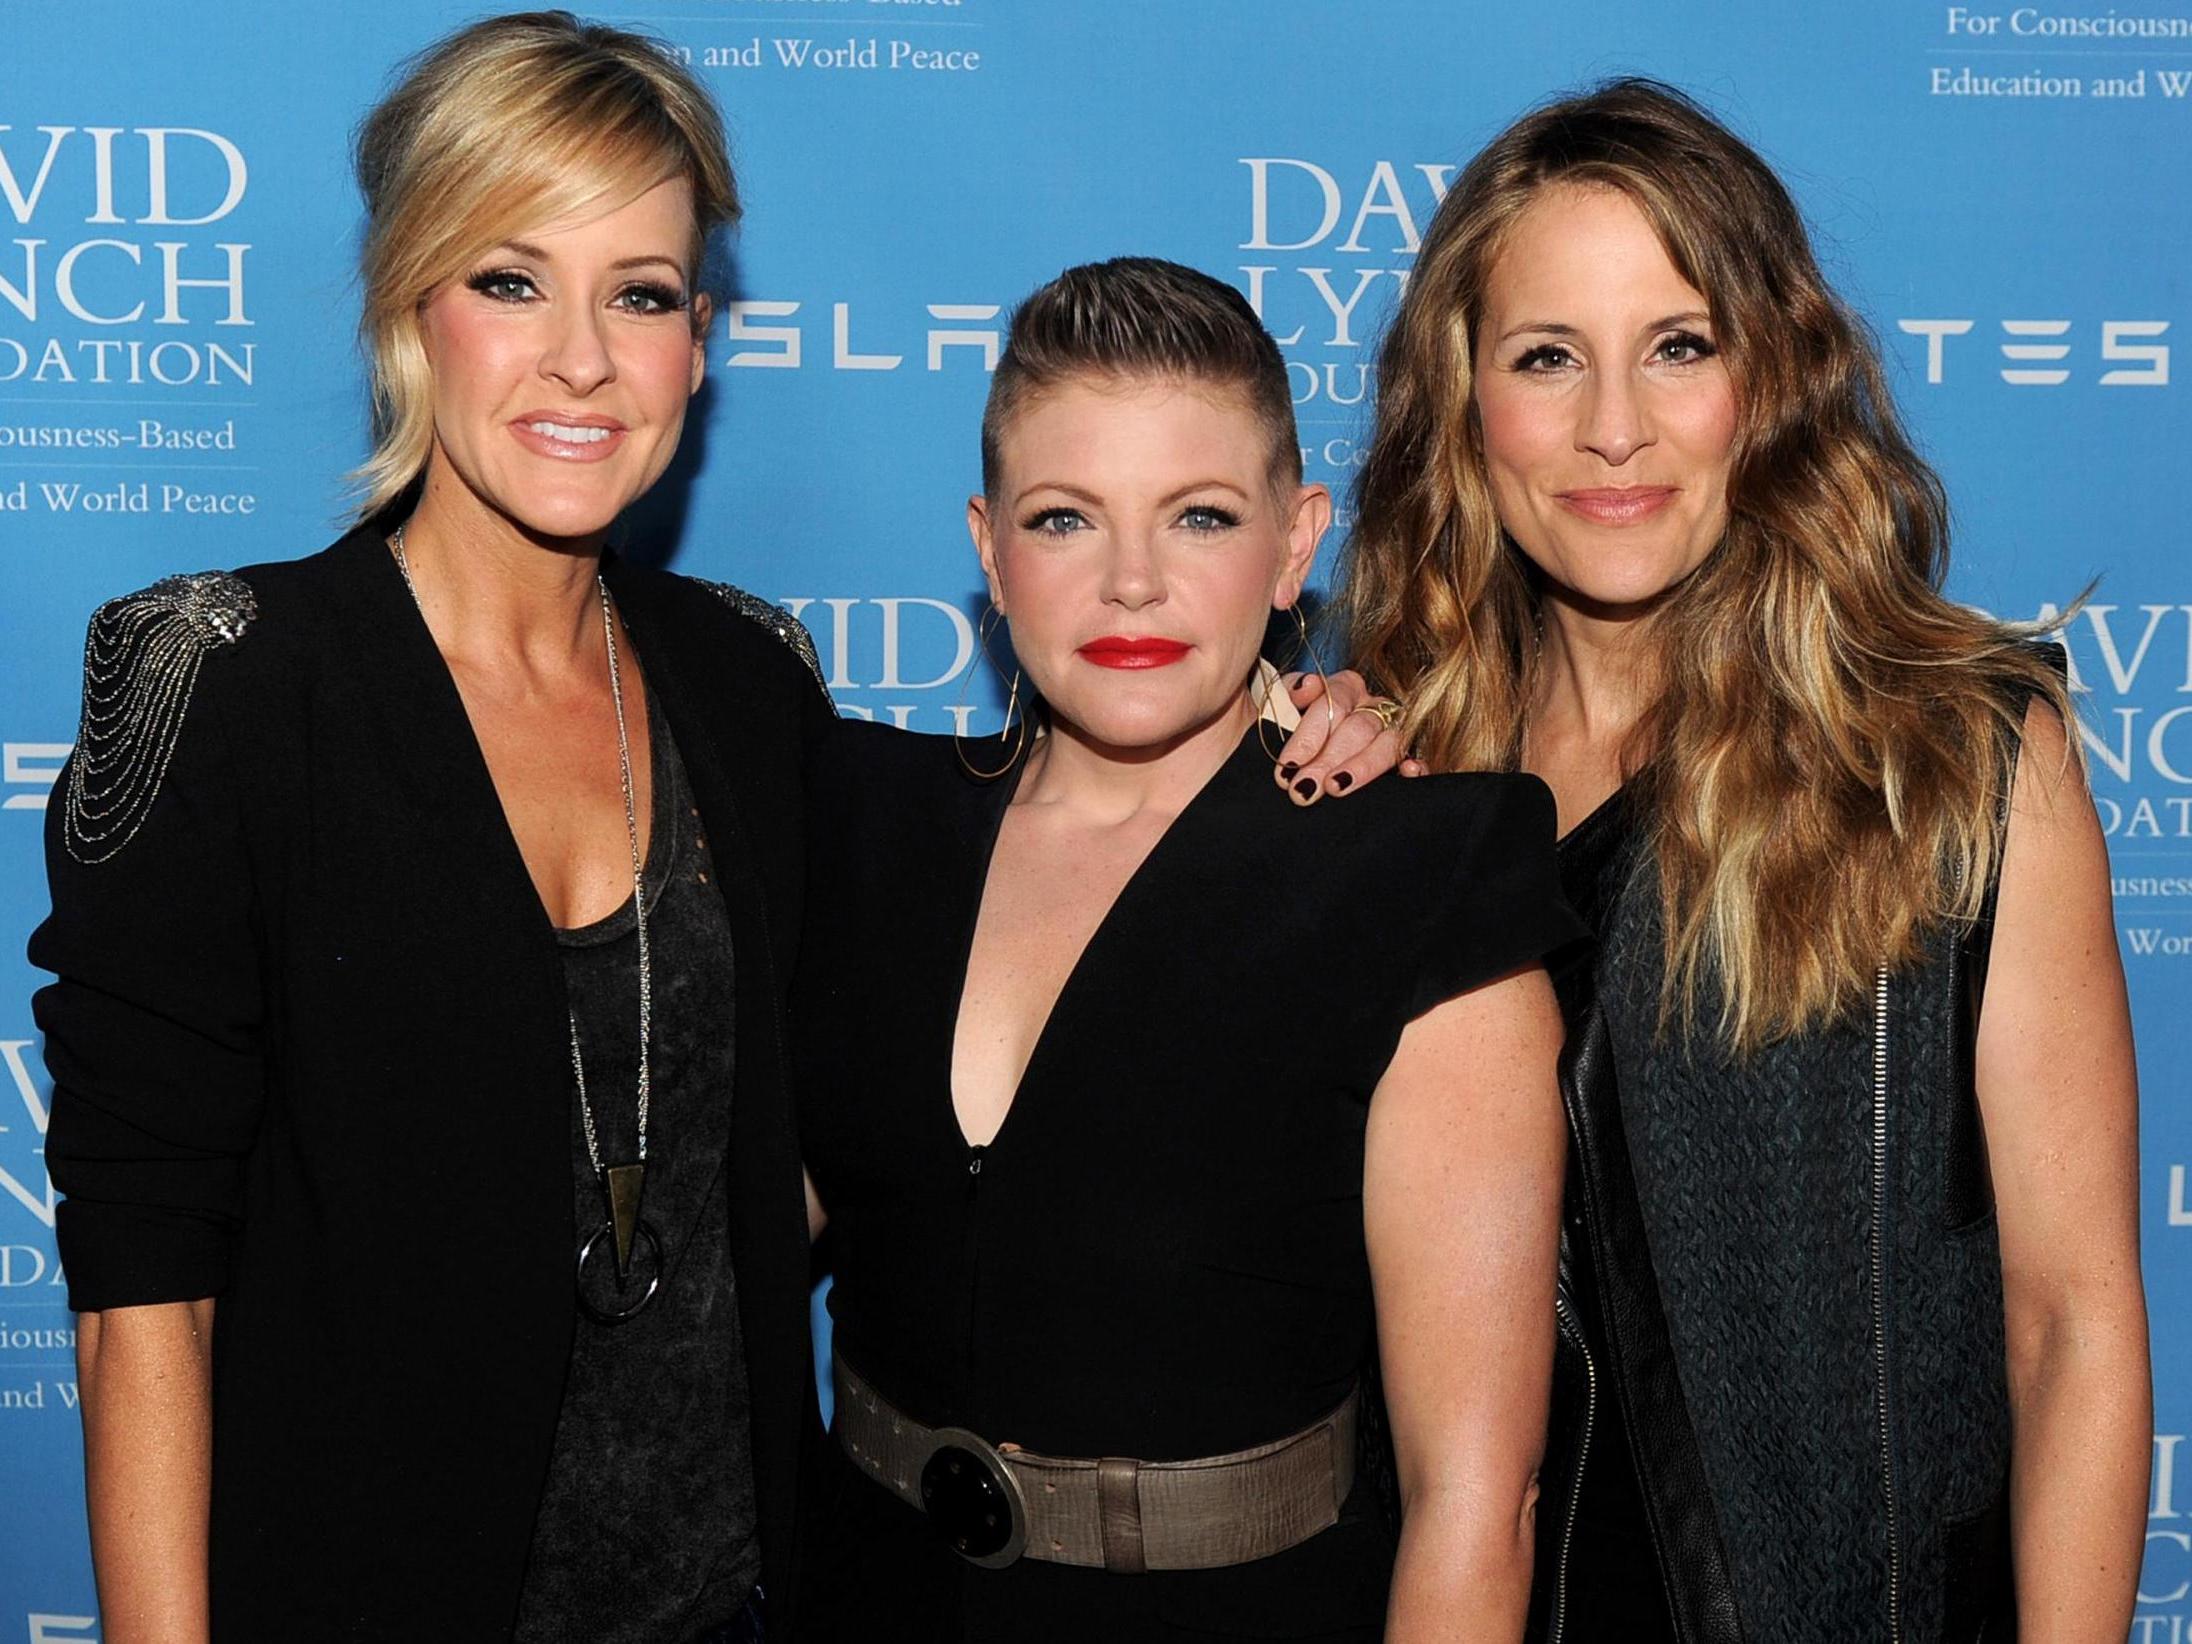 Martie Maguire, Natalie Maines and Emily Robison of The Chicks on 27 February 2014 in Beverly Hills, California.